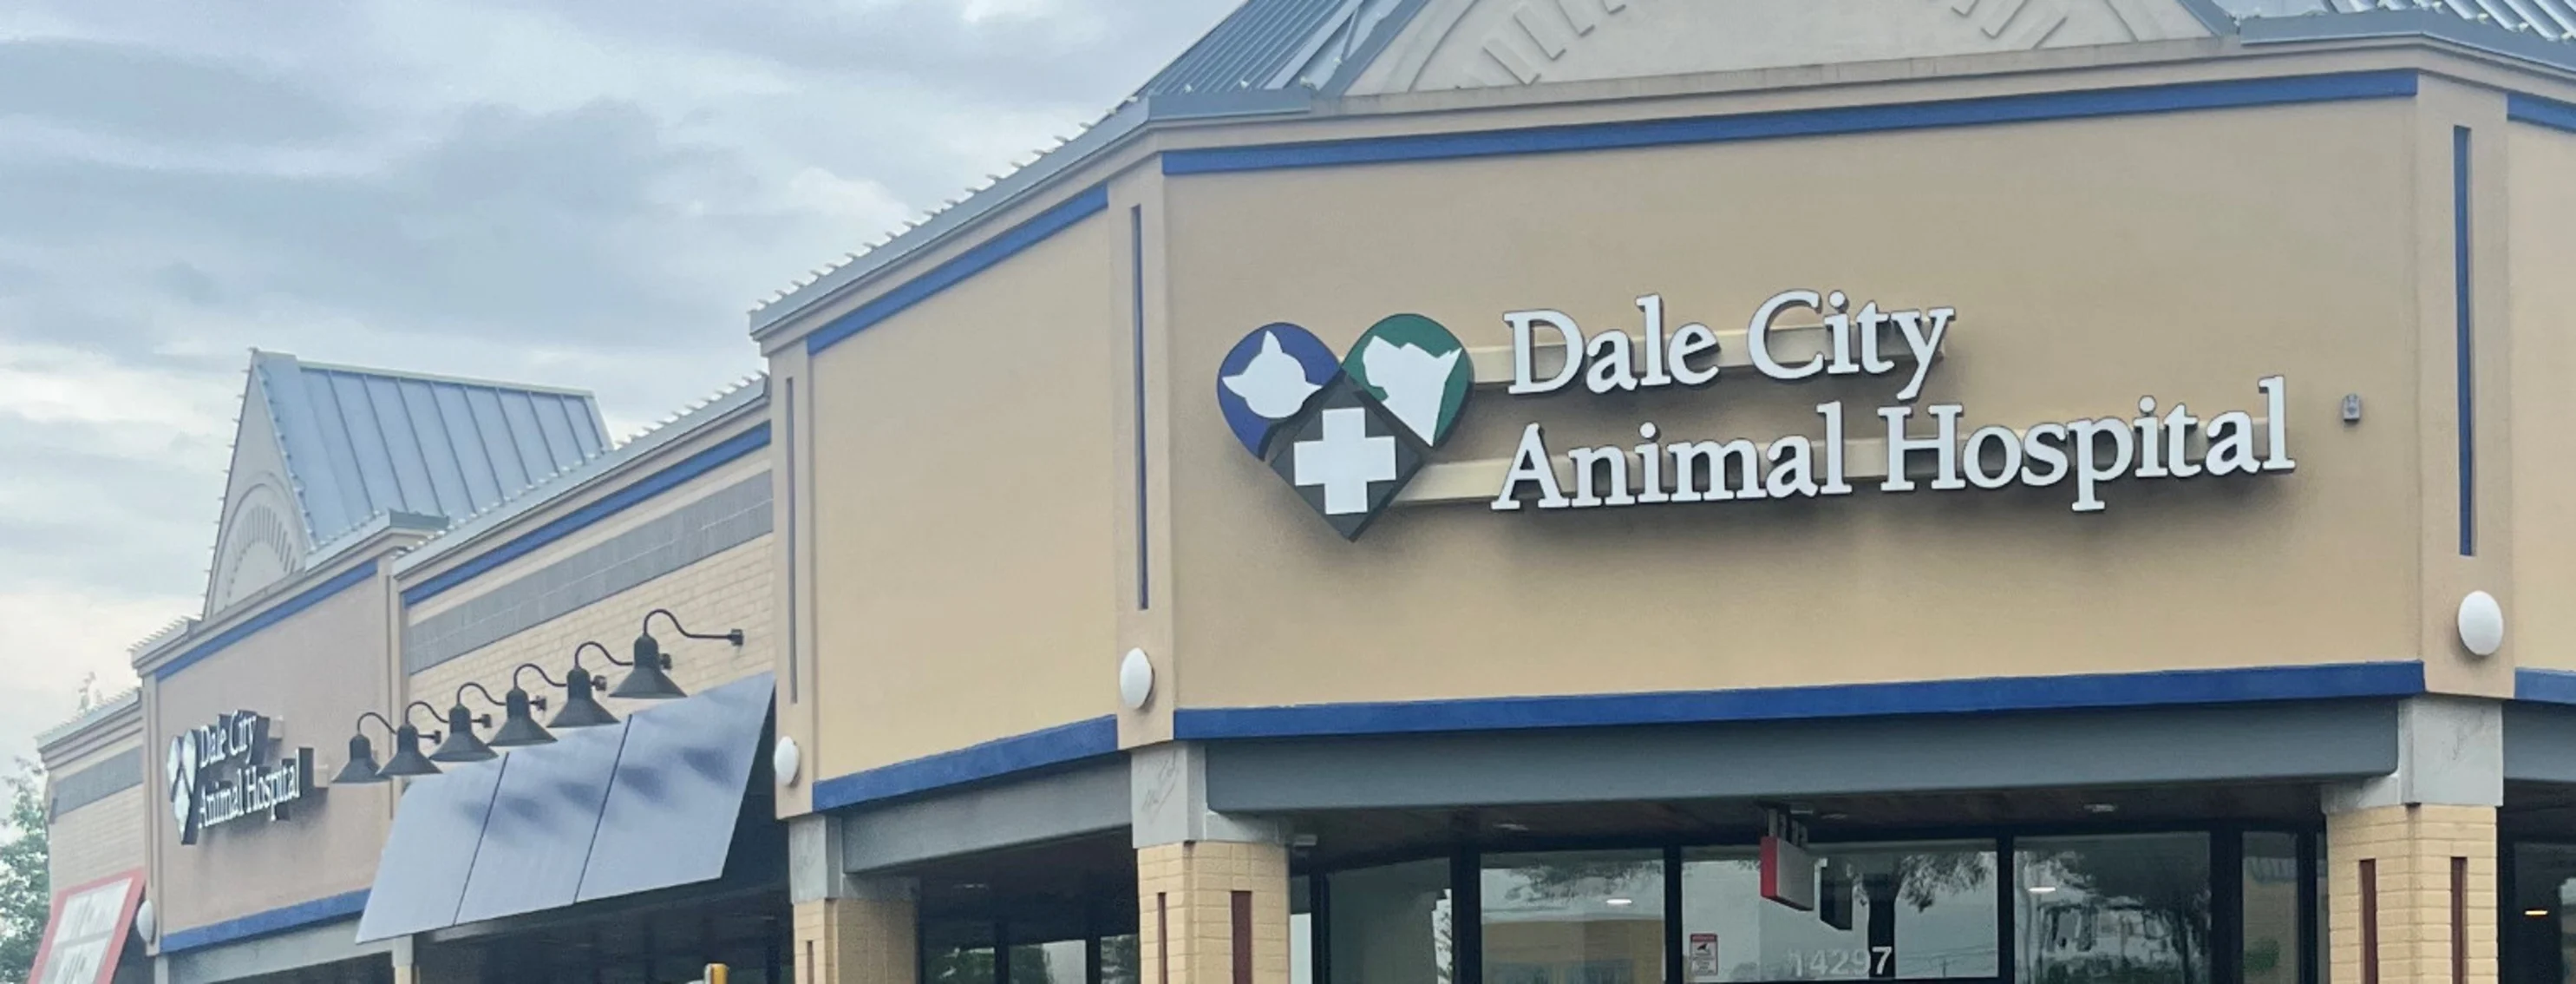 Exterior of Dale City Animal Hospital